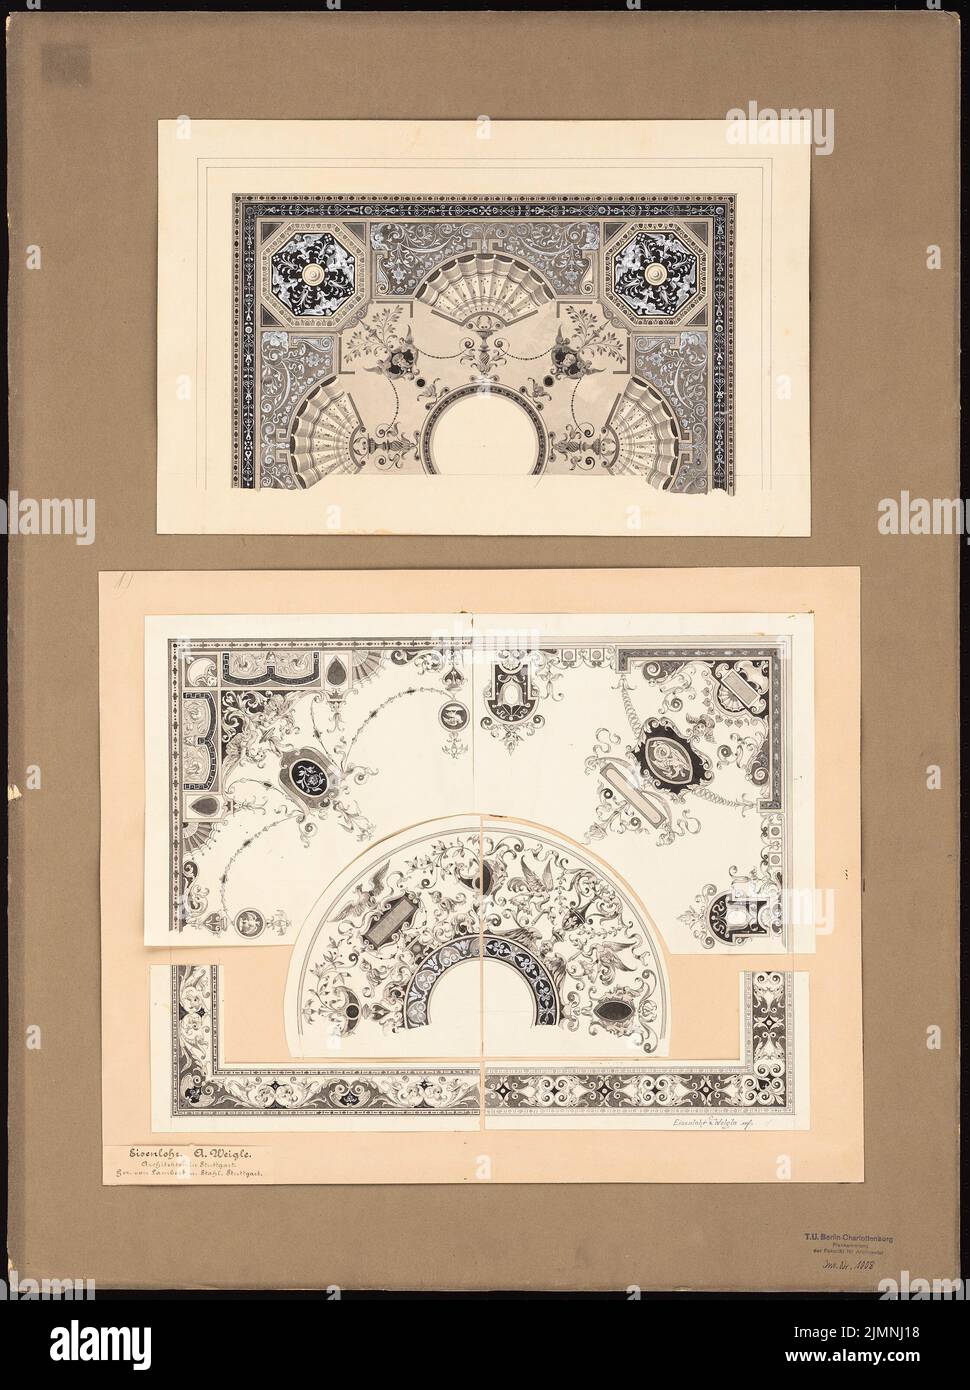 Eisenlohr & Weigle, ceiling designs (without date): View. Ink, pencil watercolor, white heighted on cardboard, 78.5 x 58.6 cm (including scan edges) Stock Photo